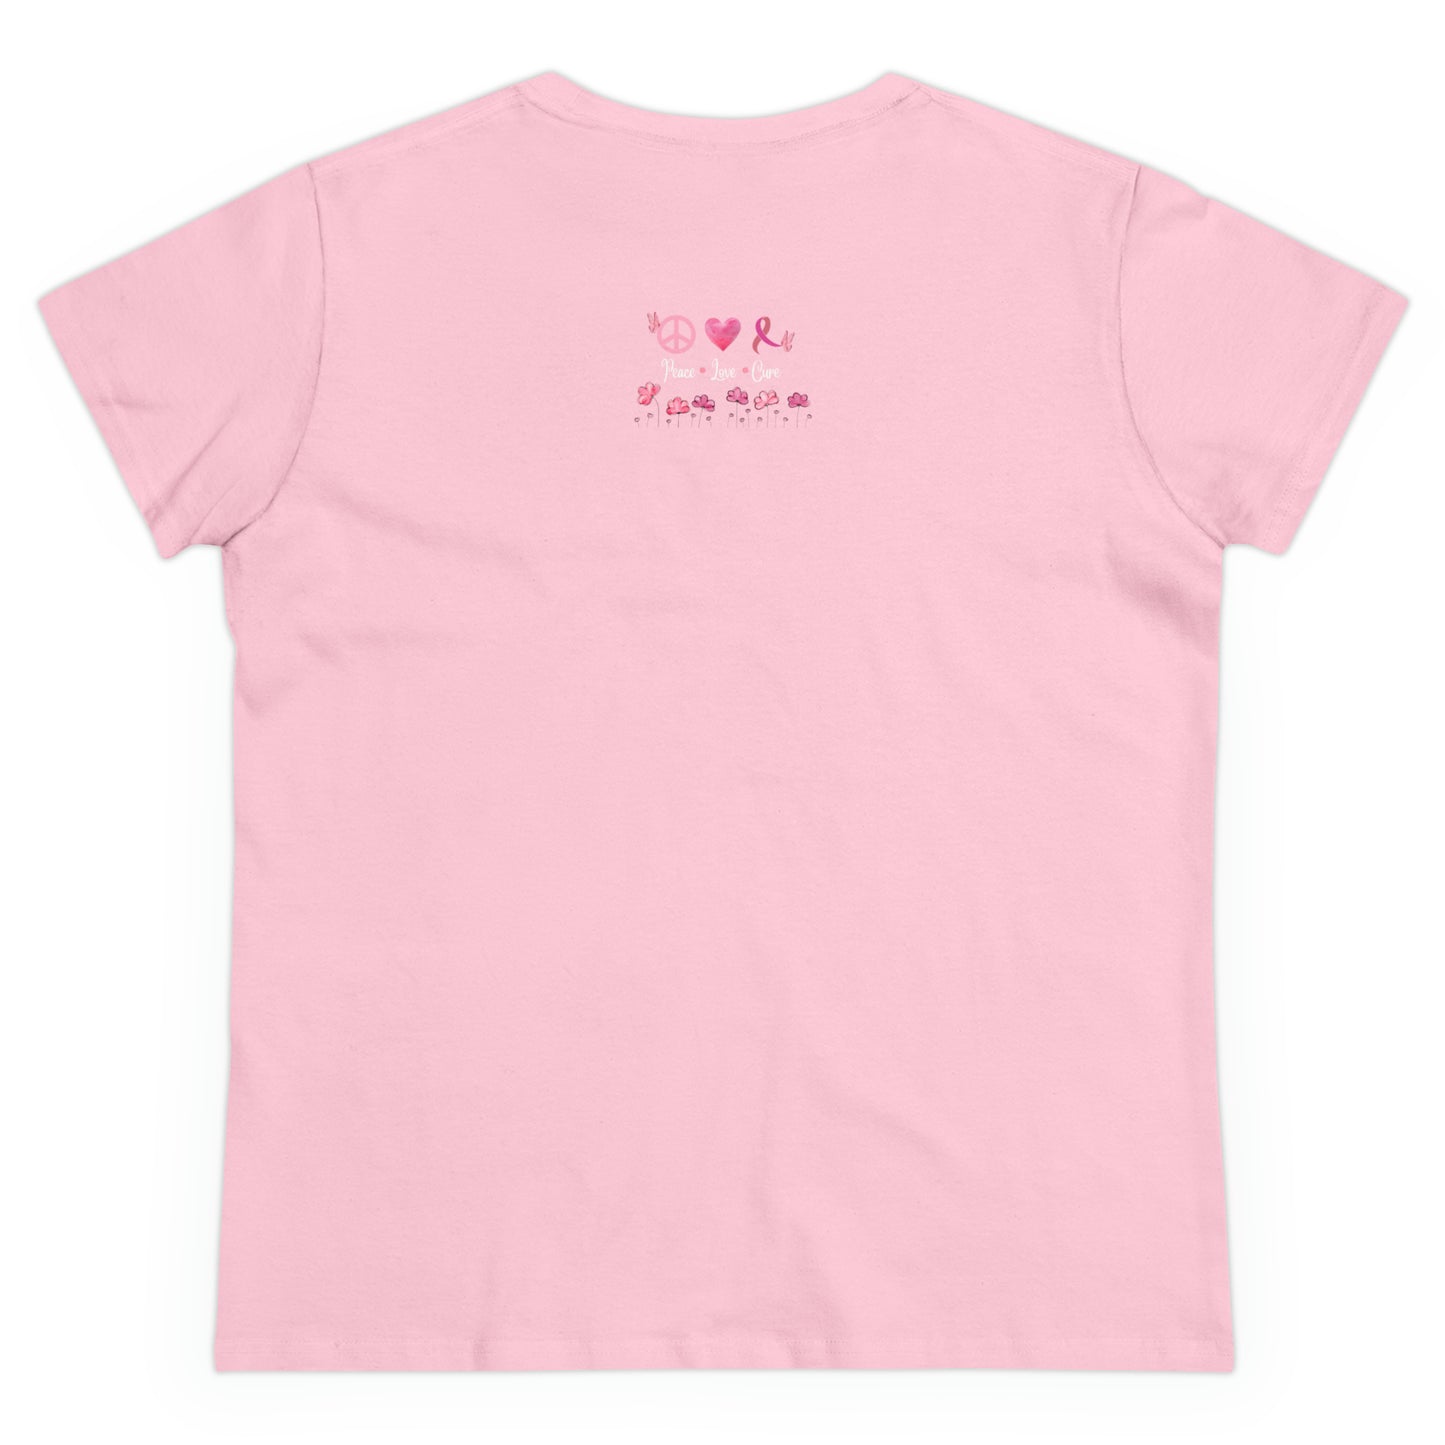 Breast Cancer Prevention Tee